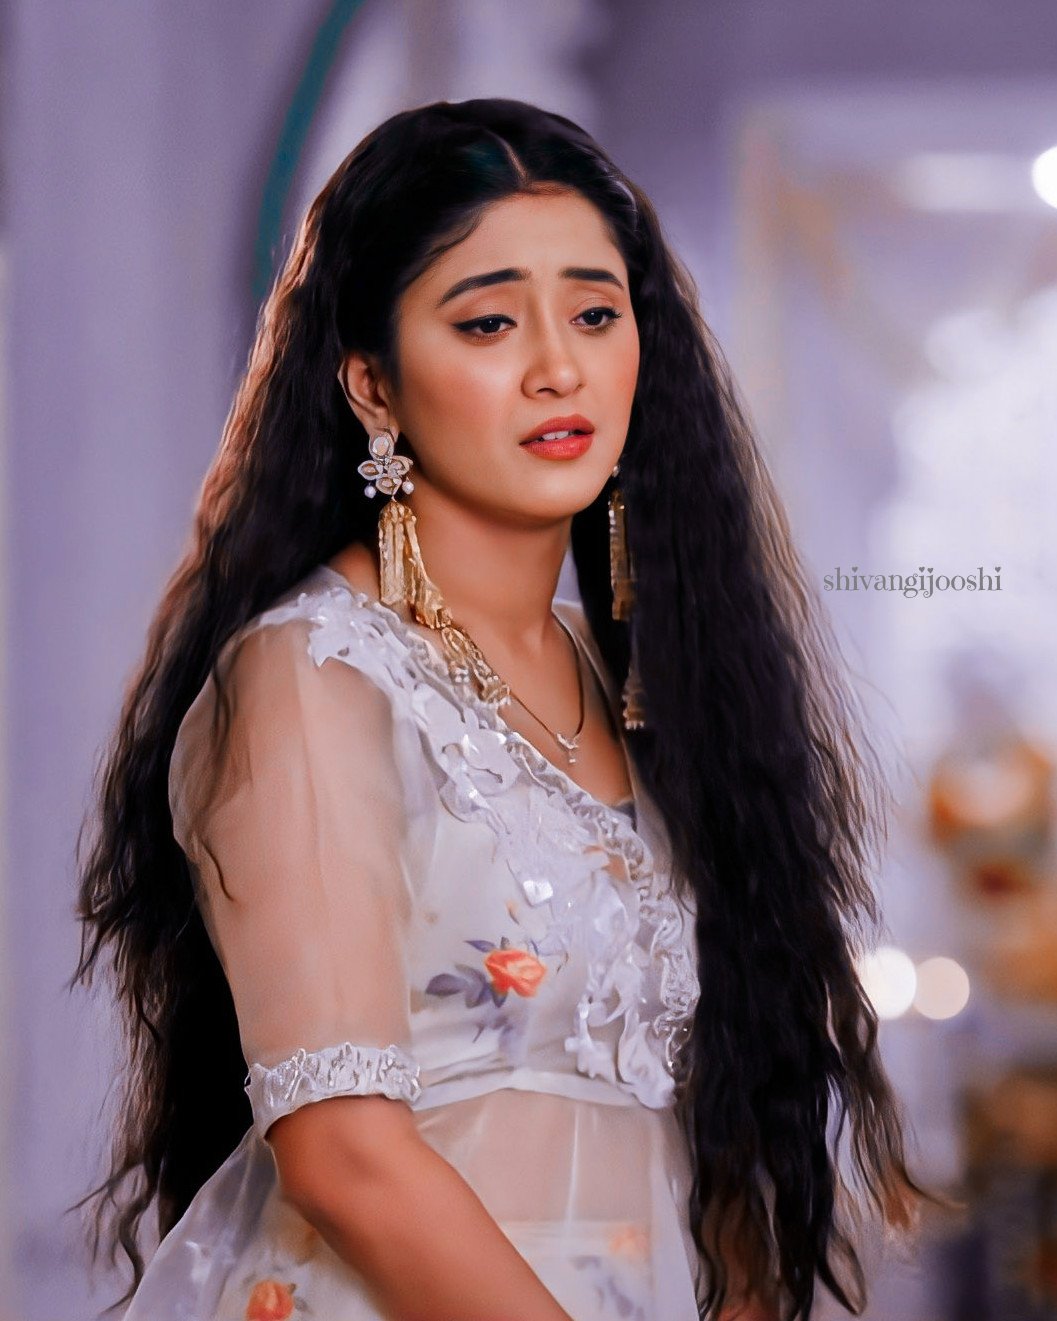 All the times Shivangi Joshi absolutely slayed in desi avatar